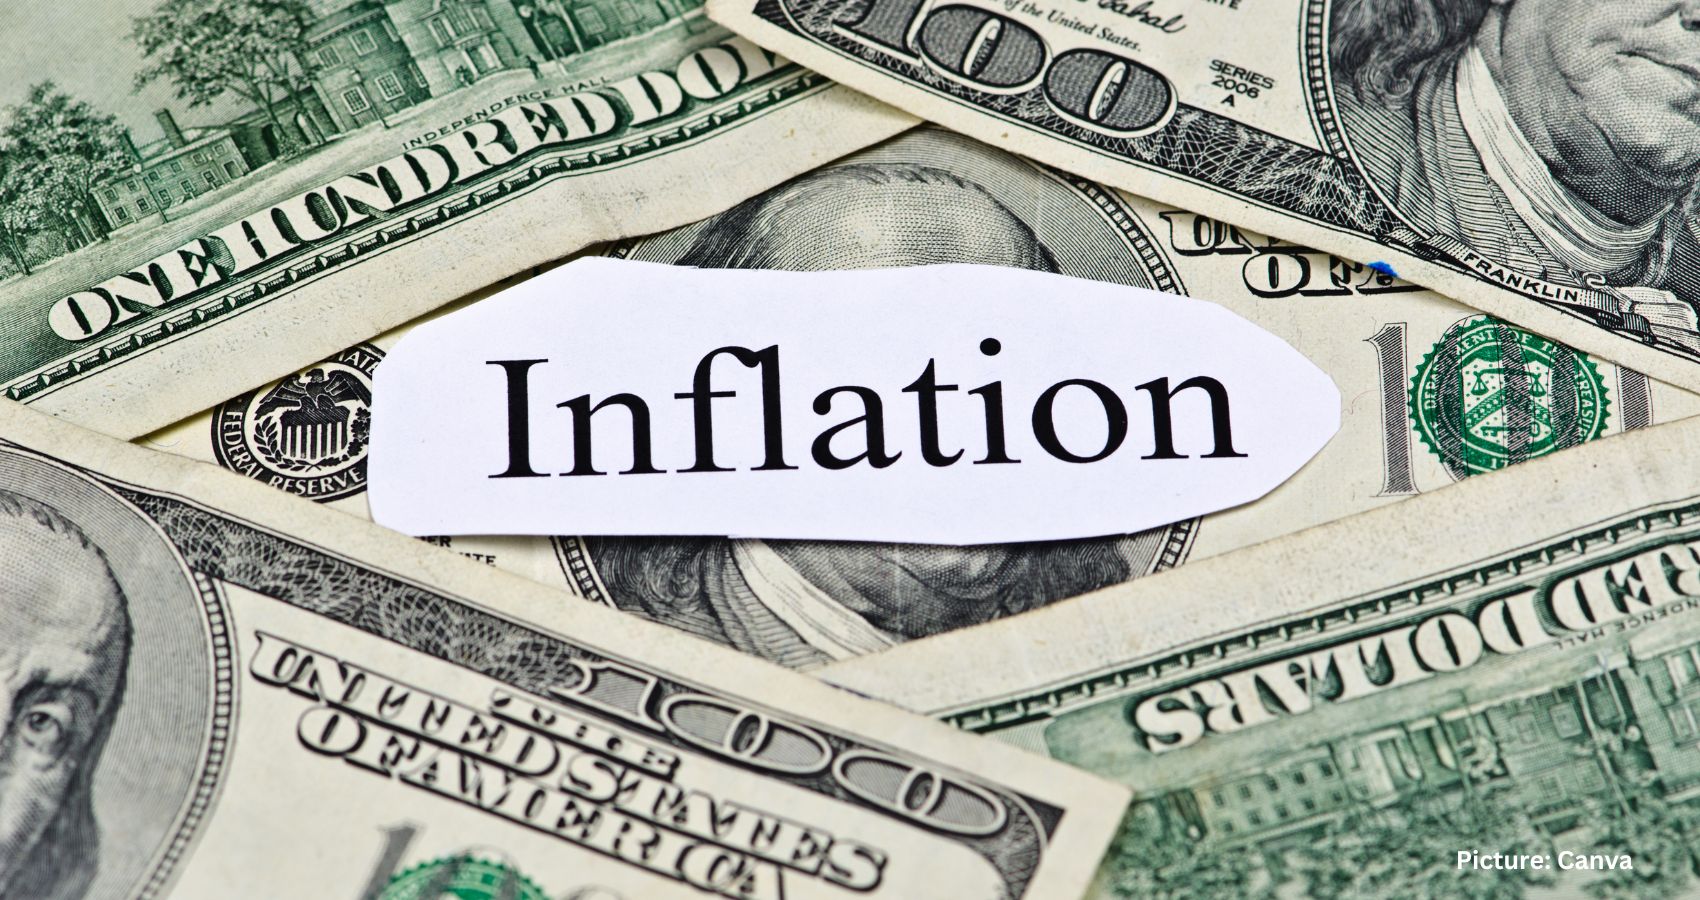 Study Finds Inflation Expected to Outpace Salary Increases Across Most Industries by 2028